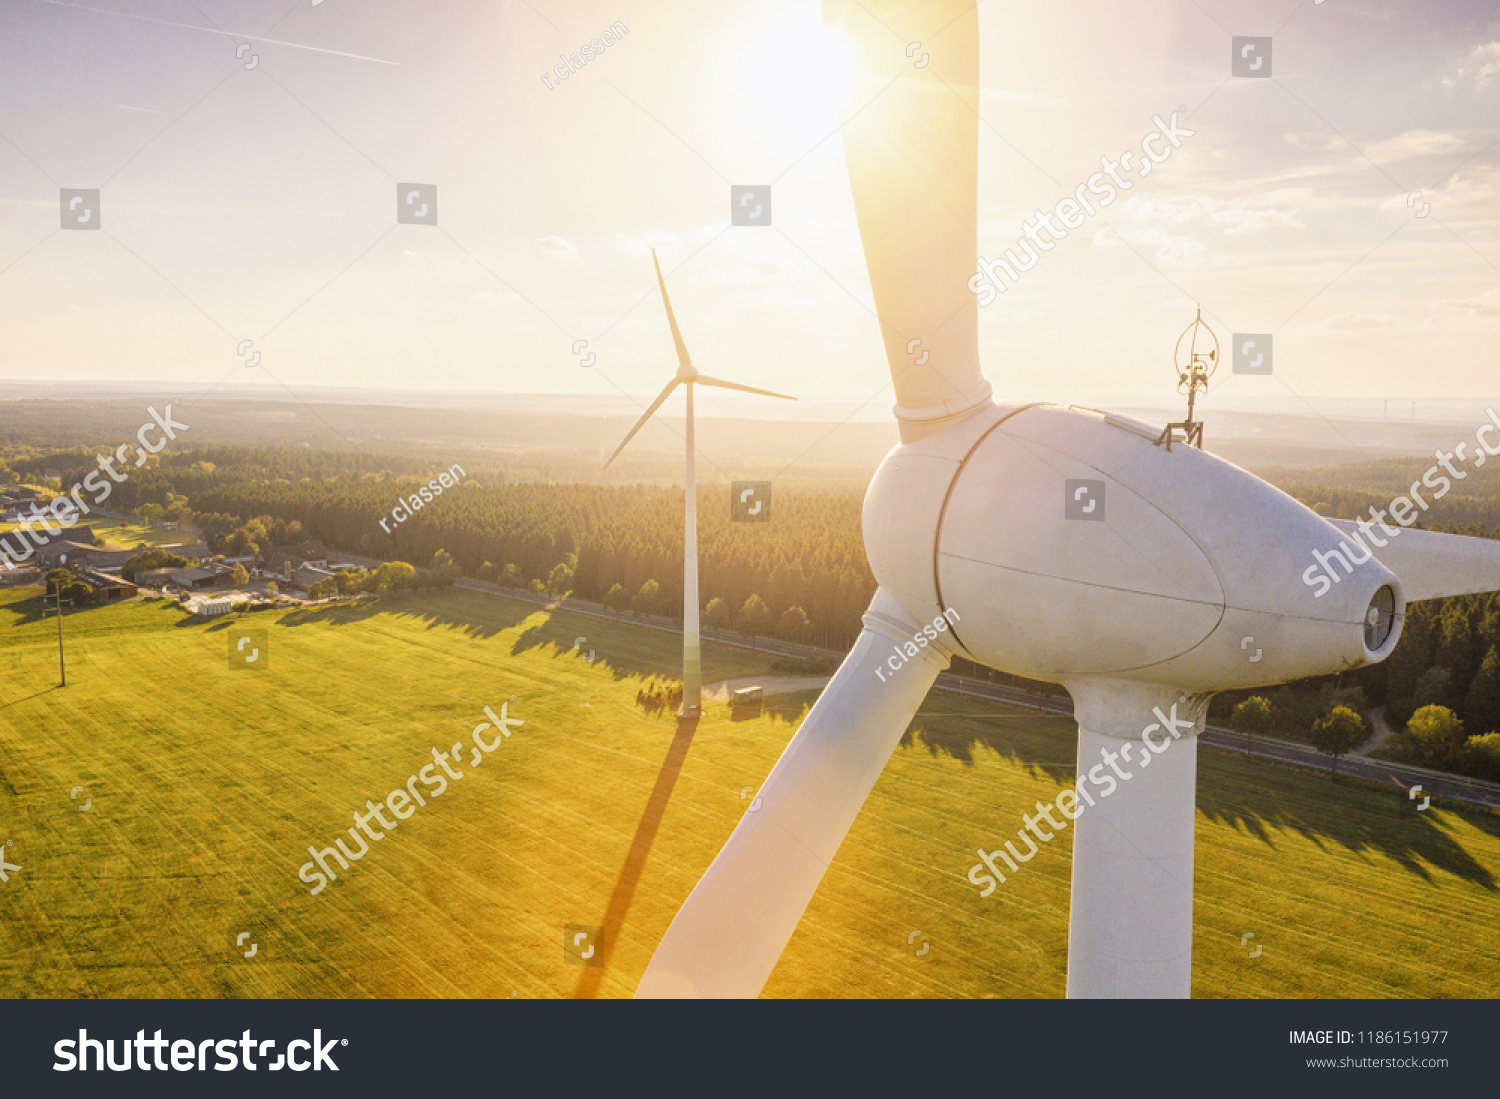 Beautiful sunset above the windmills on the field #1186151977